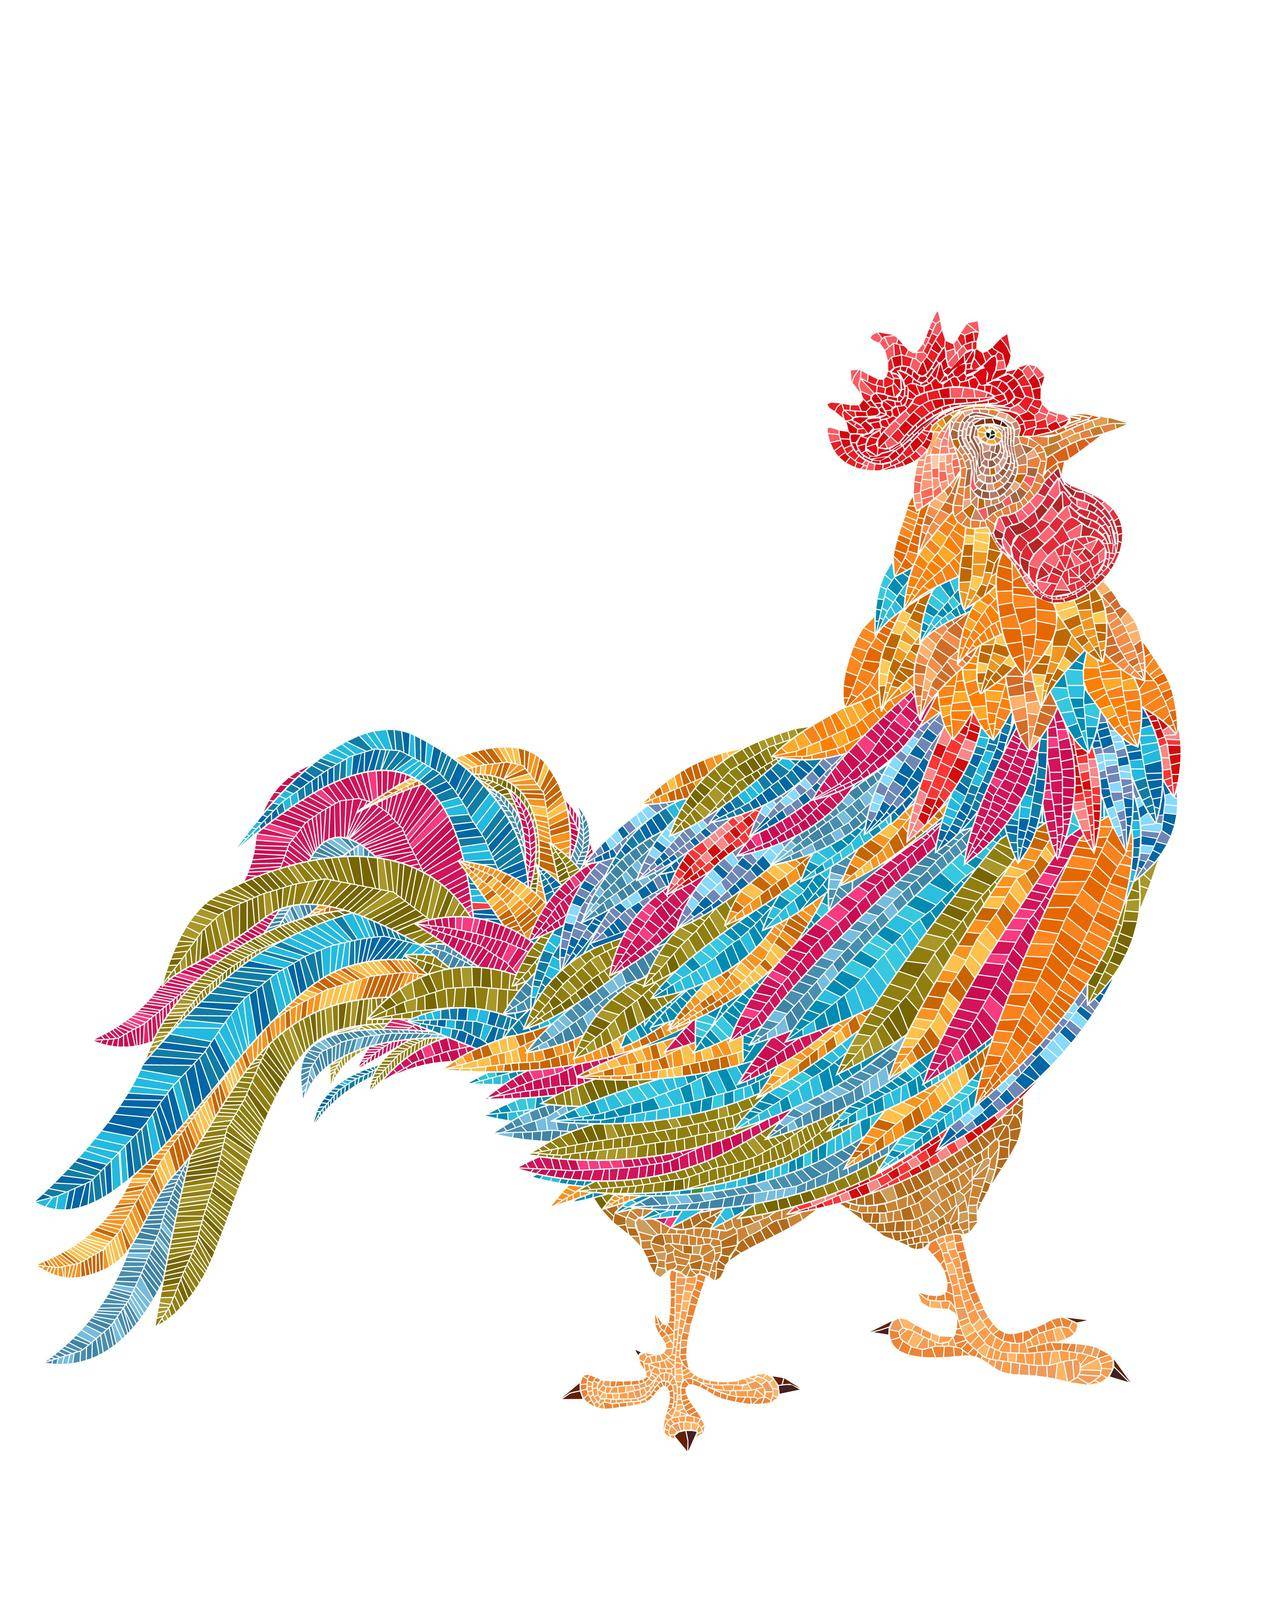 Rooster mosaic by Lirch